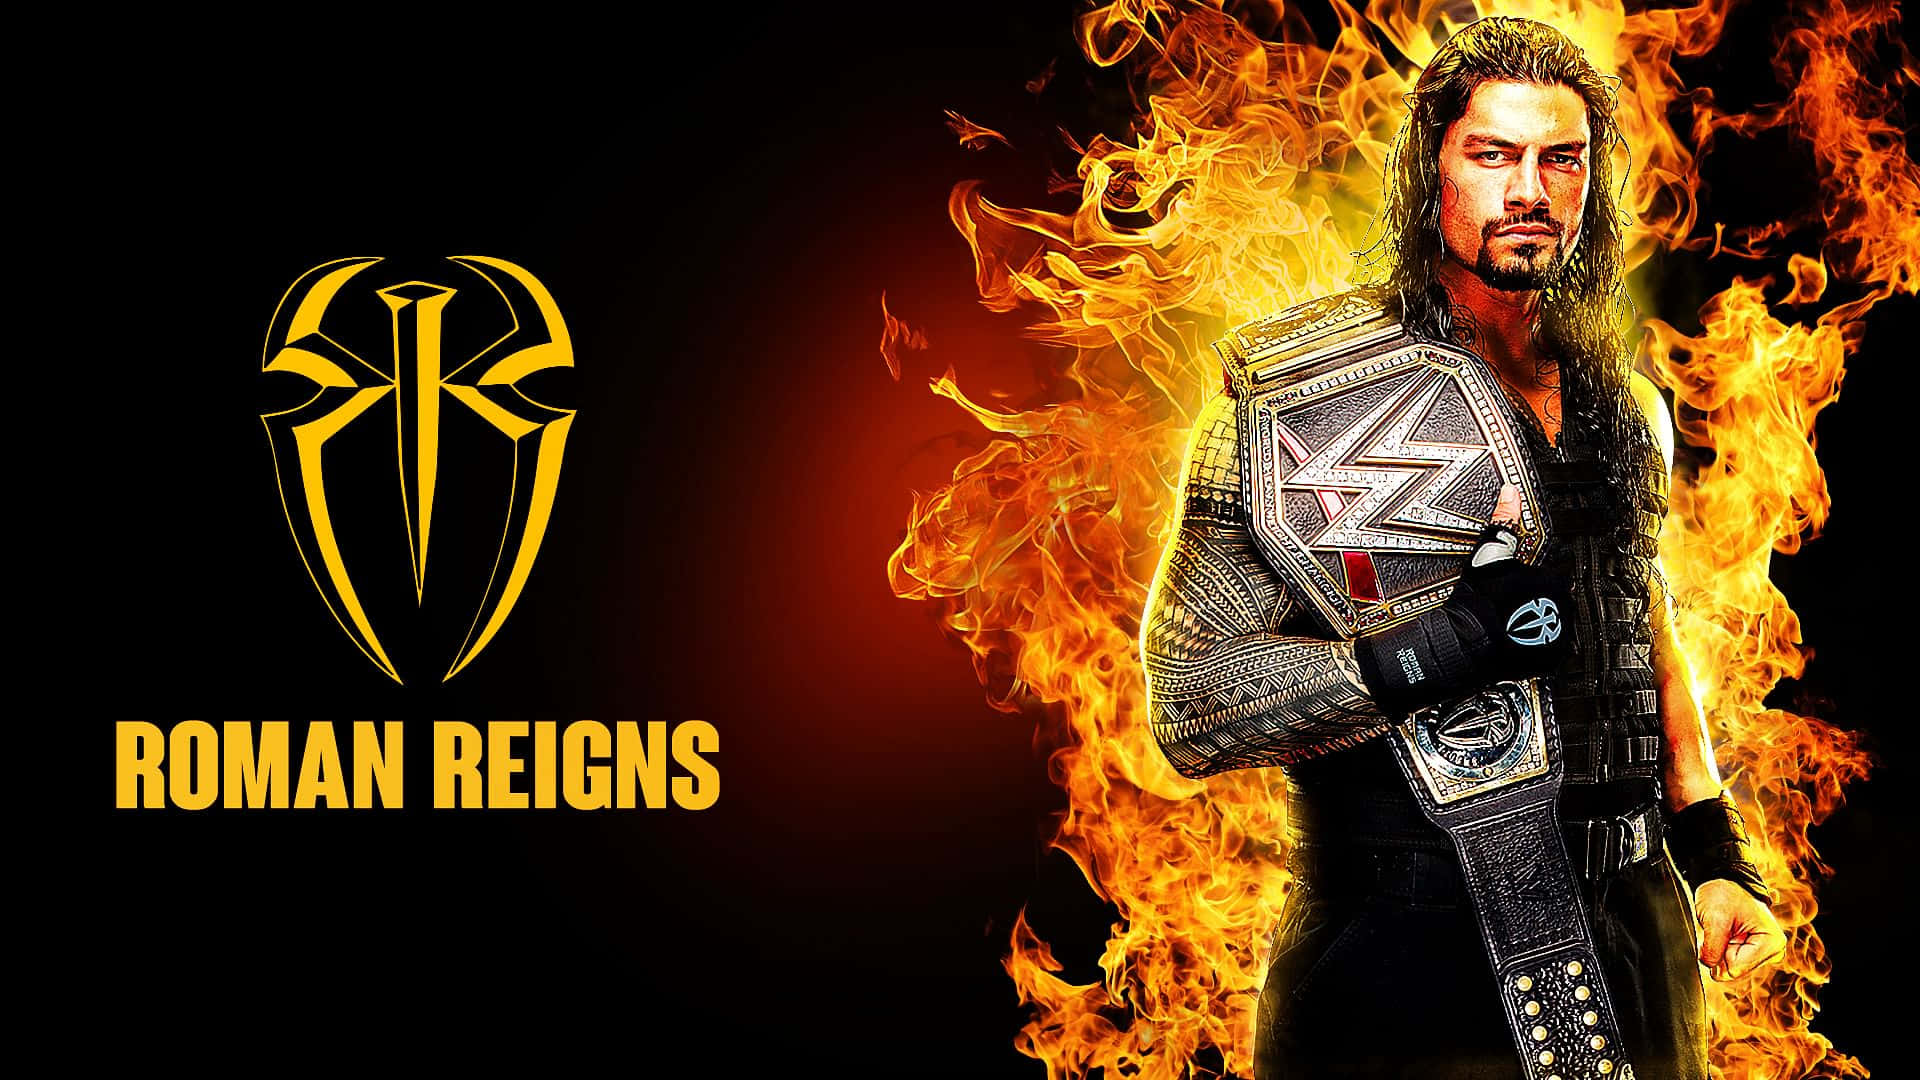 Show your support for WWE superstars with this cool patterned wallpaper. Wallpaper